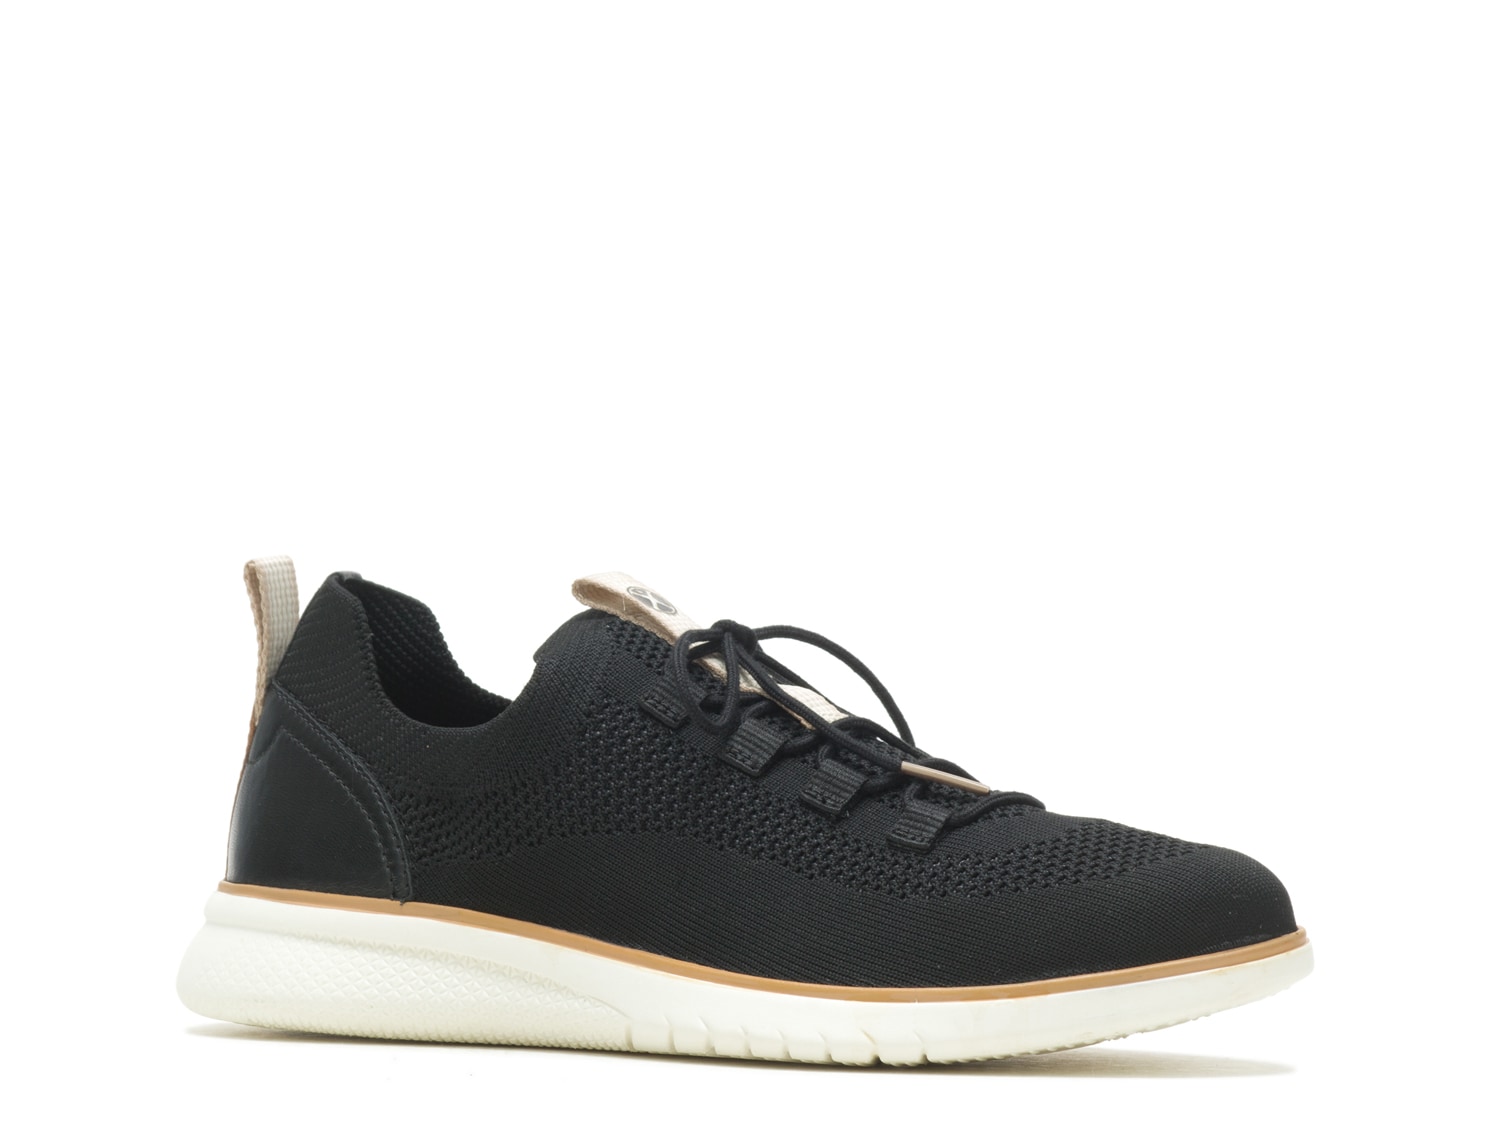 Hush Puppies Advance Knit Lace-Up Sneaker - Women's - Free Shipping | DSW